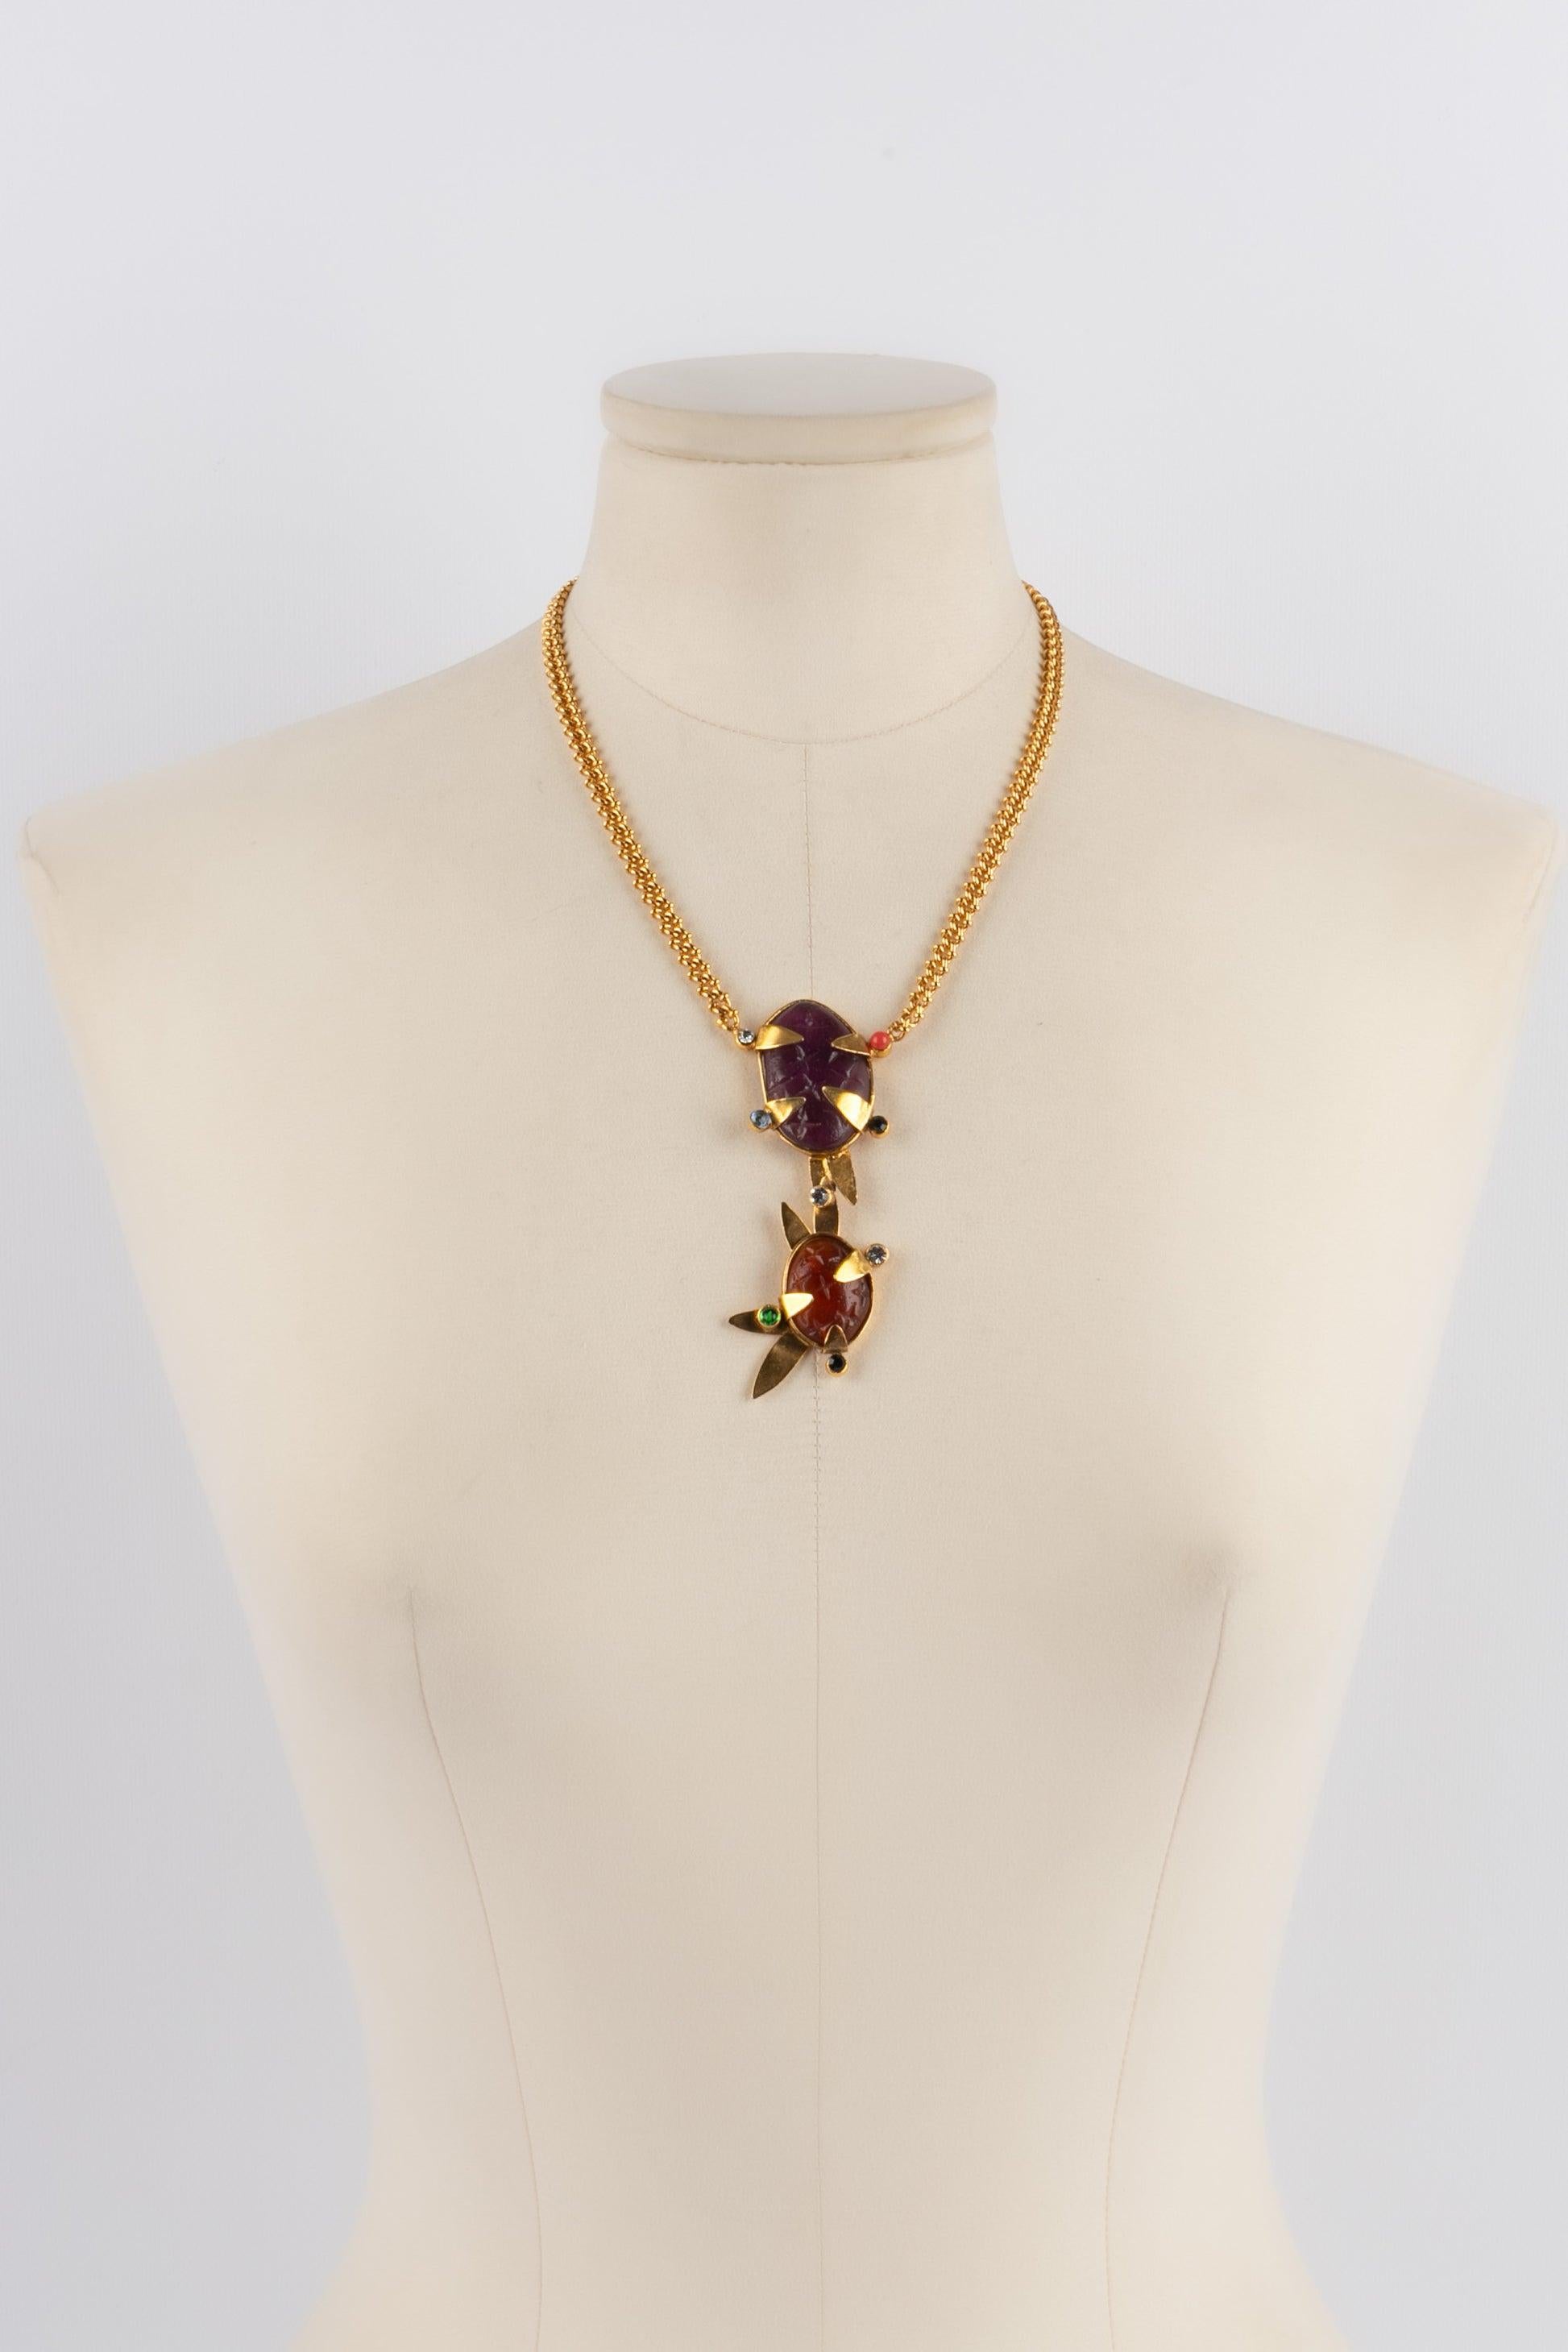 Daum - Golden metal necklace with glass paste and rhinestones. Not signed jewelry.

Additional information:
Condition: Very good condition
Dimensions: Length: 47 cm

Seller Reference: BC197